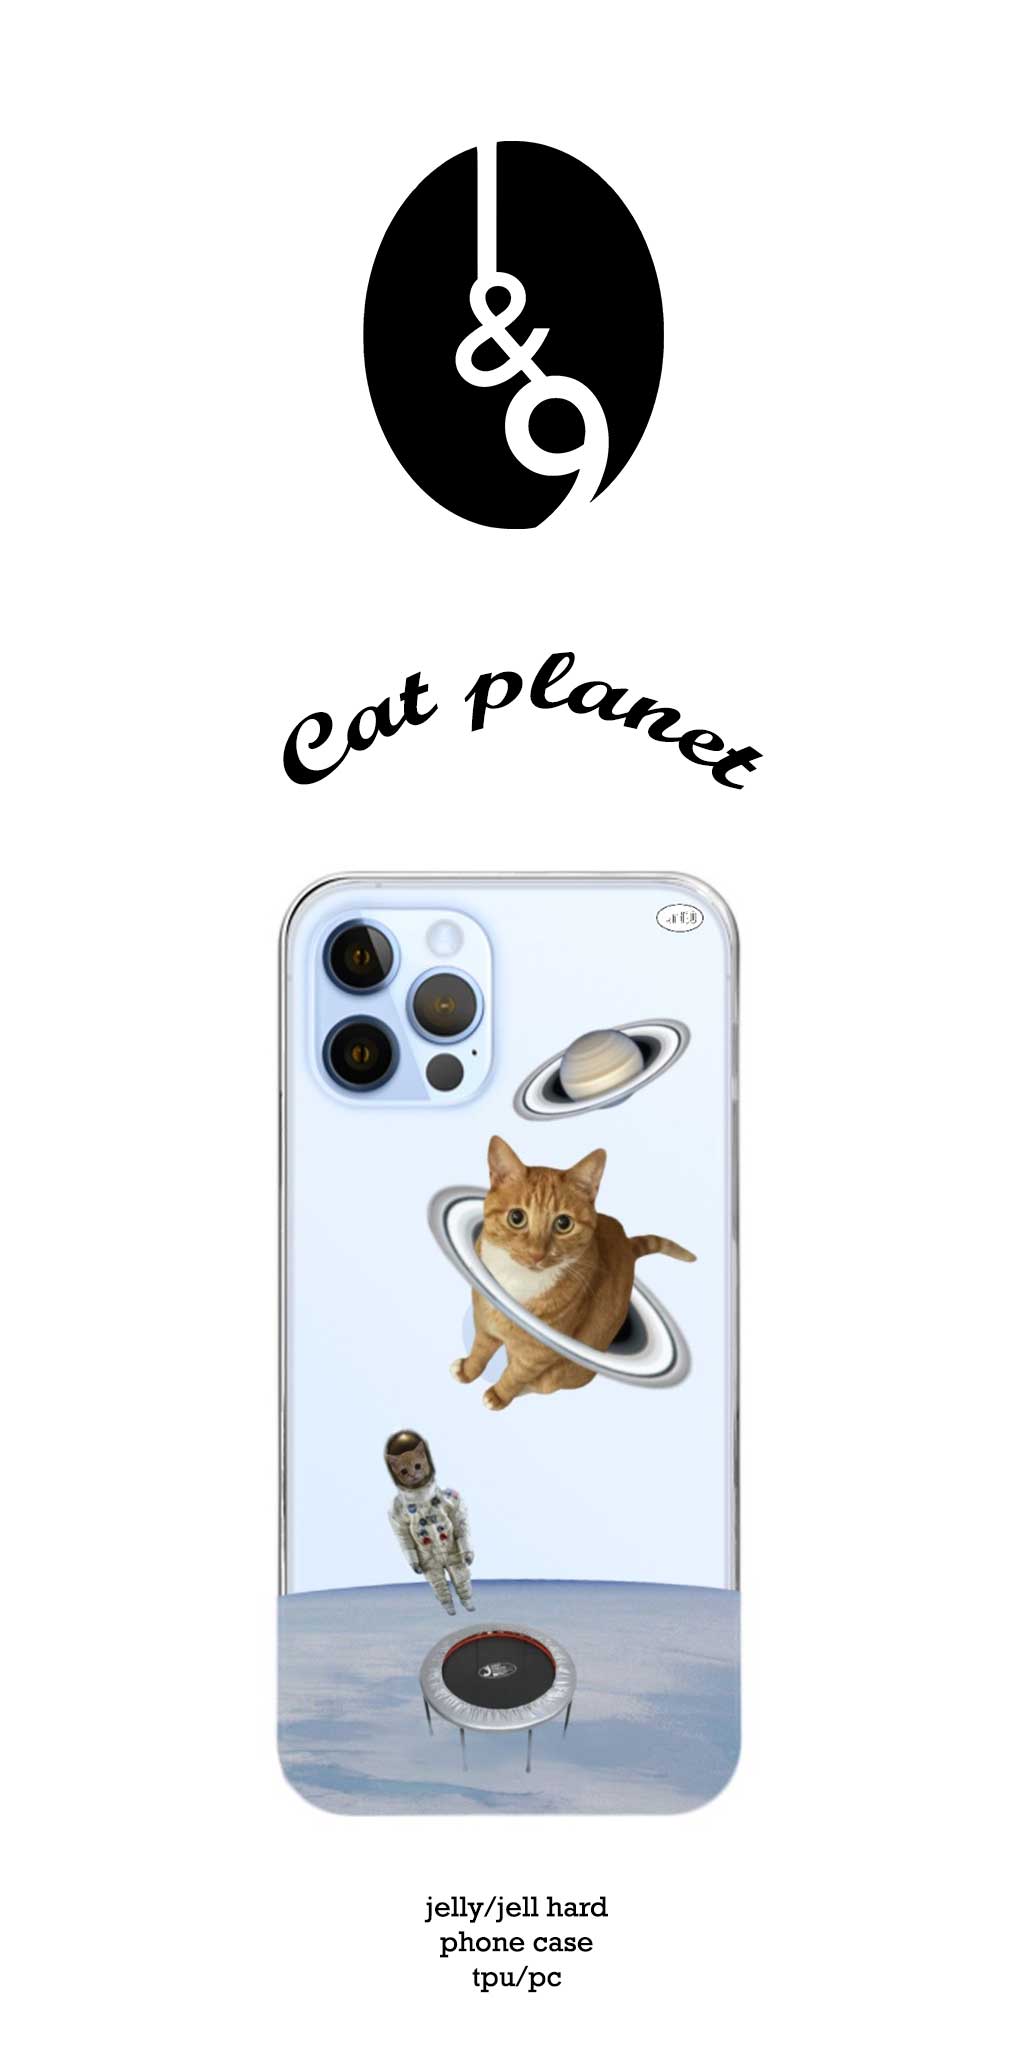 [Jell Hard Case] Cat Planet Admission Ticket